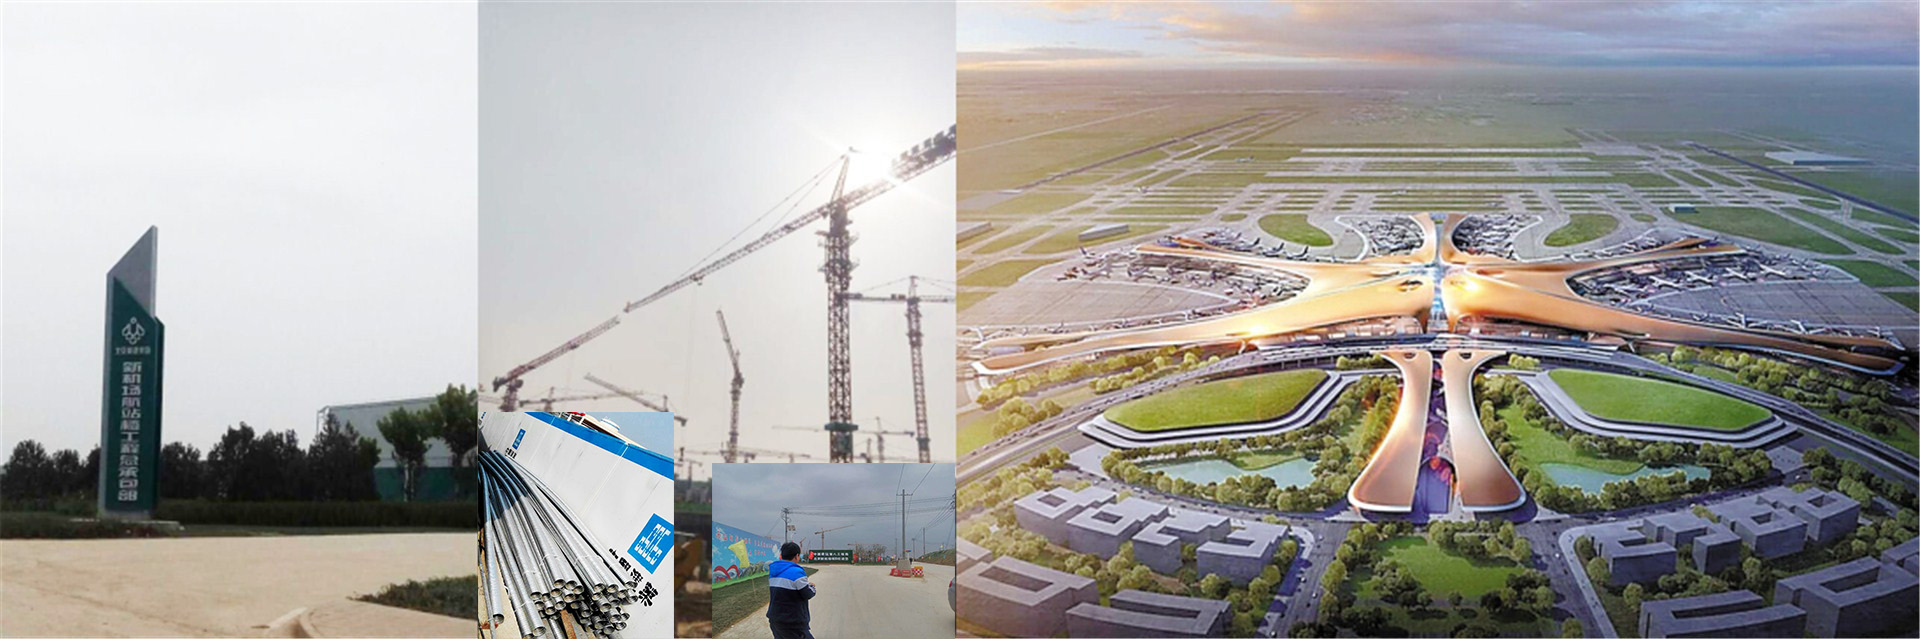 THE NEW BEIJING AIRPORT IN DAXING DISTRIC